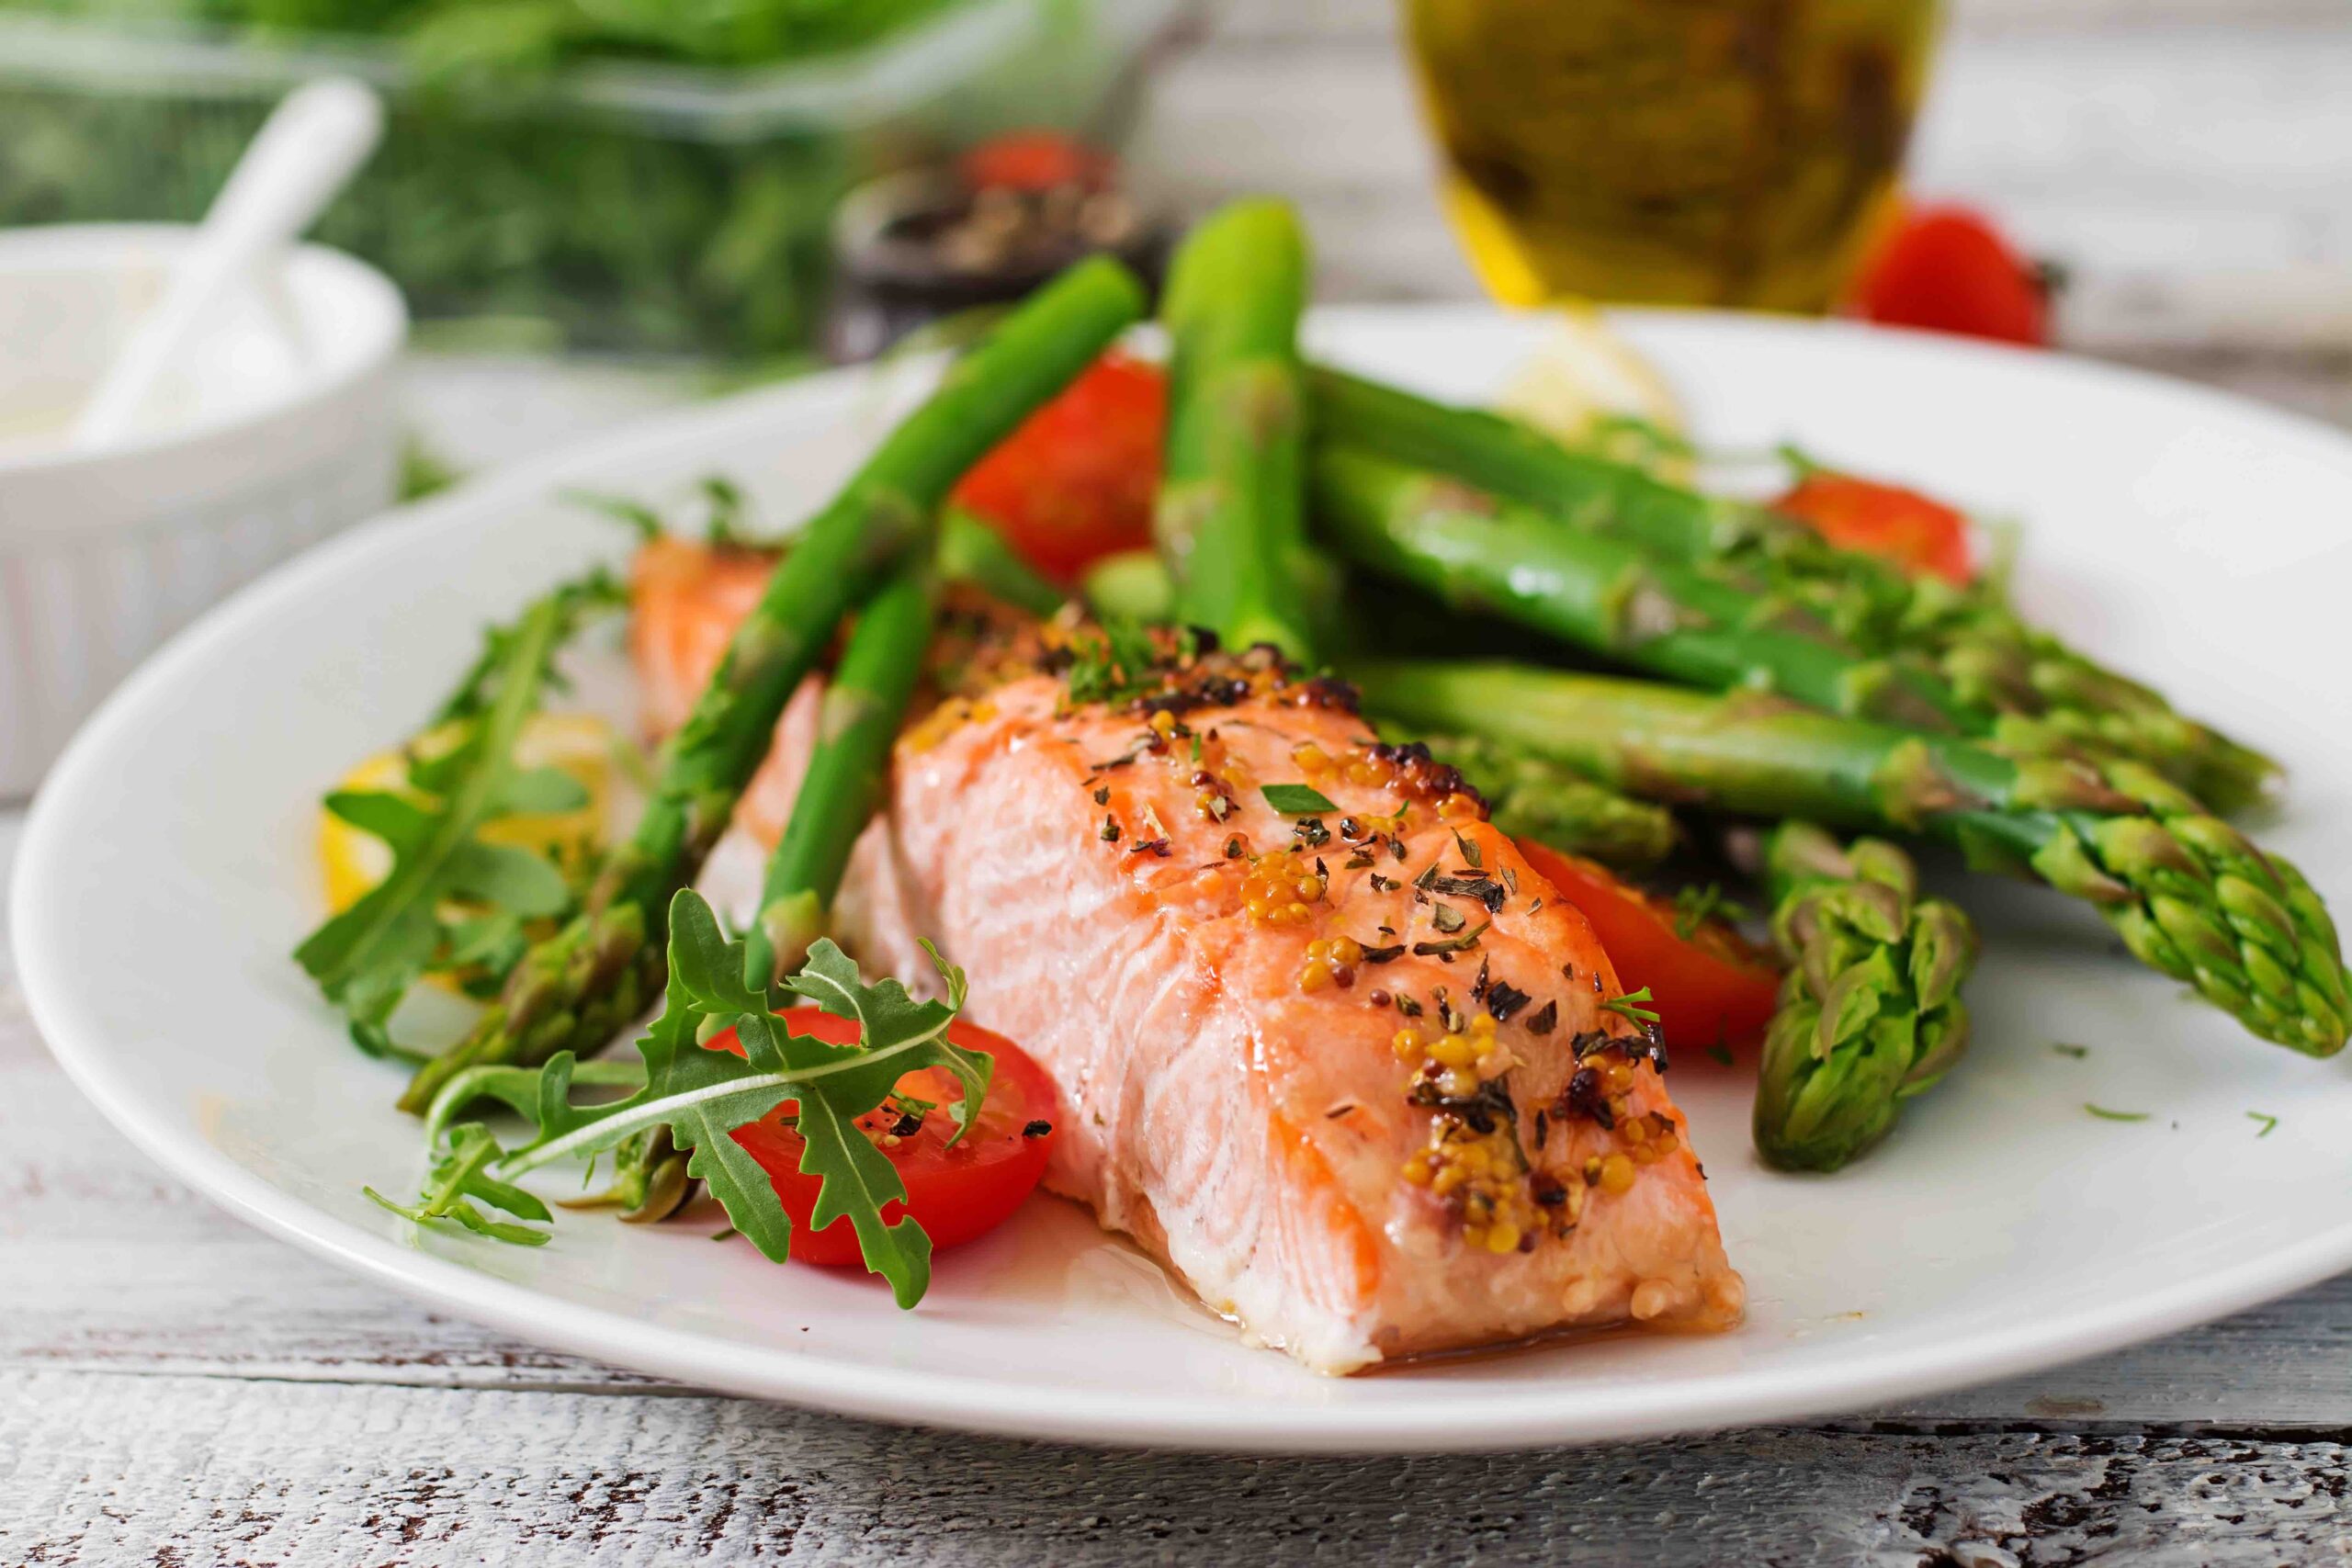 Nutrients for athletes: Salmon is a good source of Omega-3 fatty acids